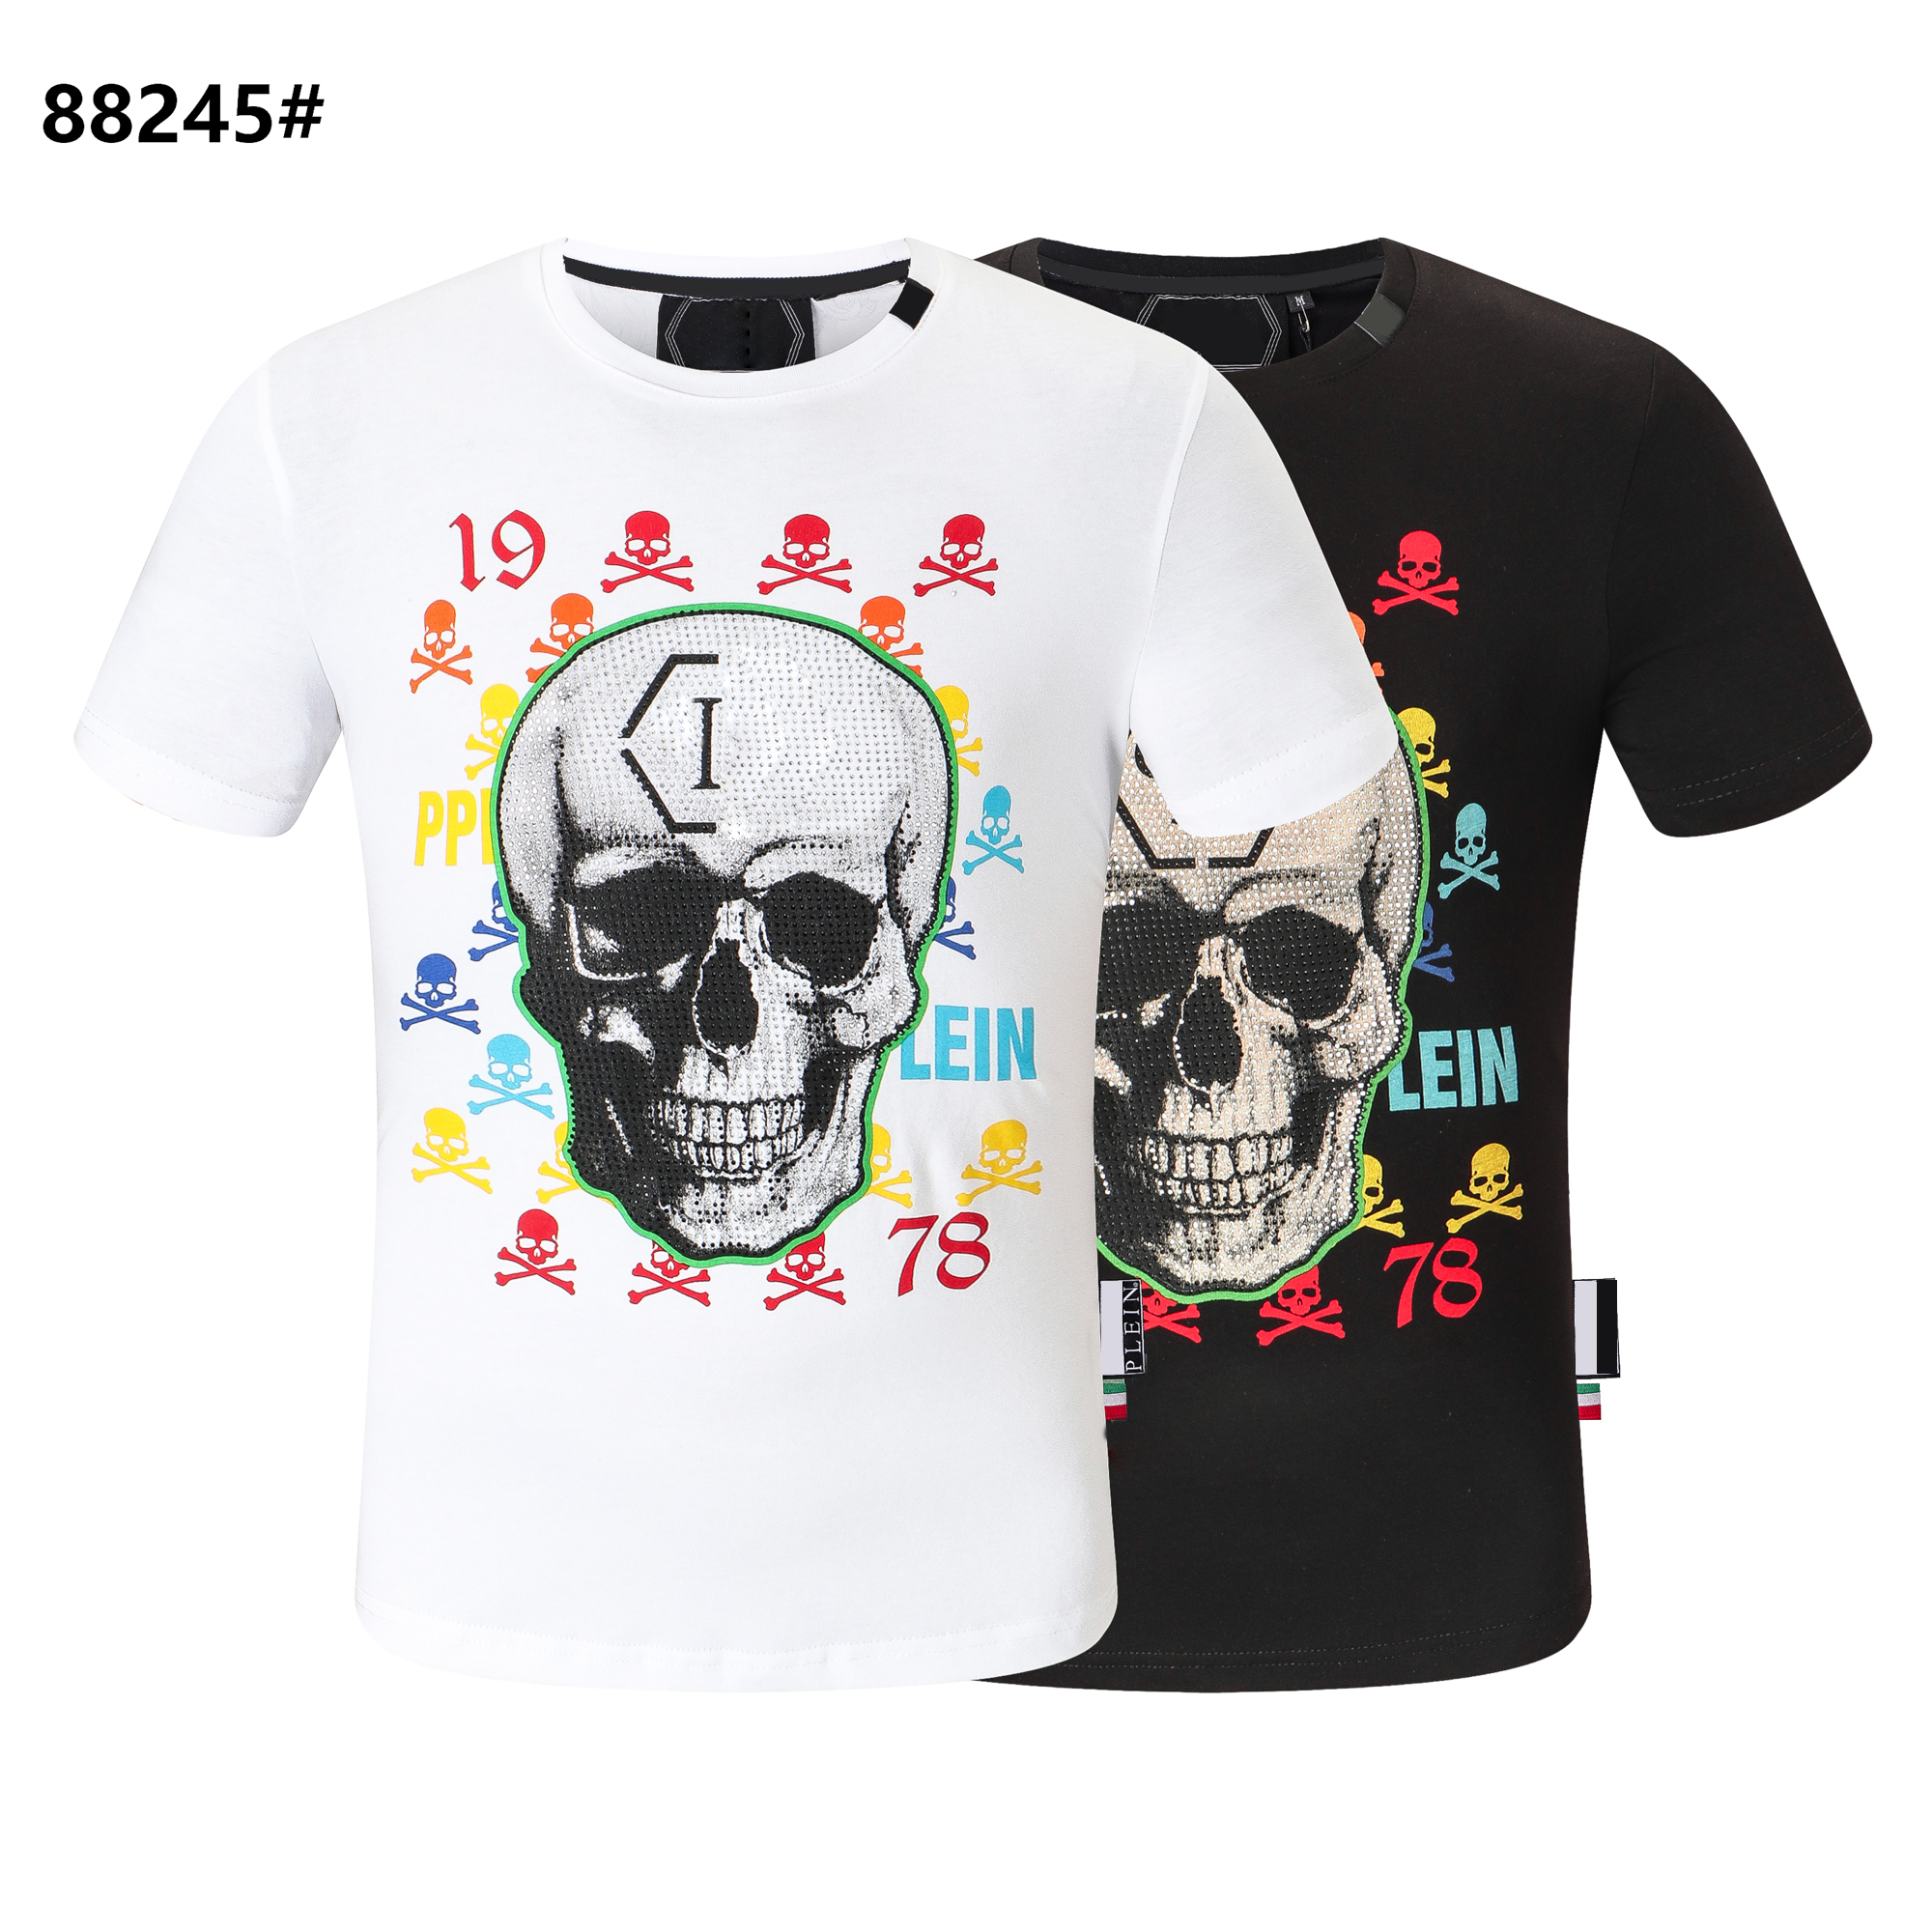 

PHILLIP PLAIN Men SKULL T shirt PP Geometric Pattern Summer Casual Tee Fashion Ins Style Top Streetwear Loose High Quality Sport Hip-hop Mature Trendy T Shirts, More styles 432456323